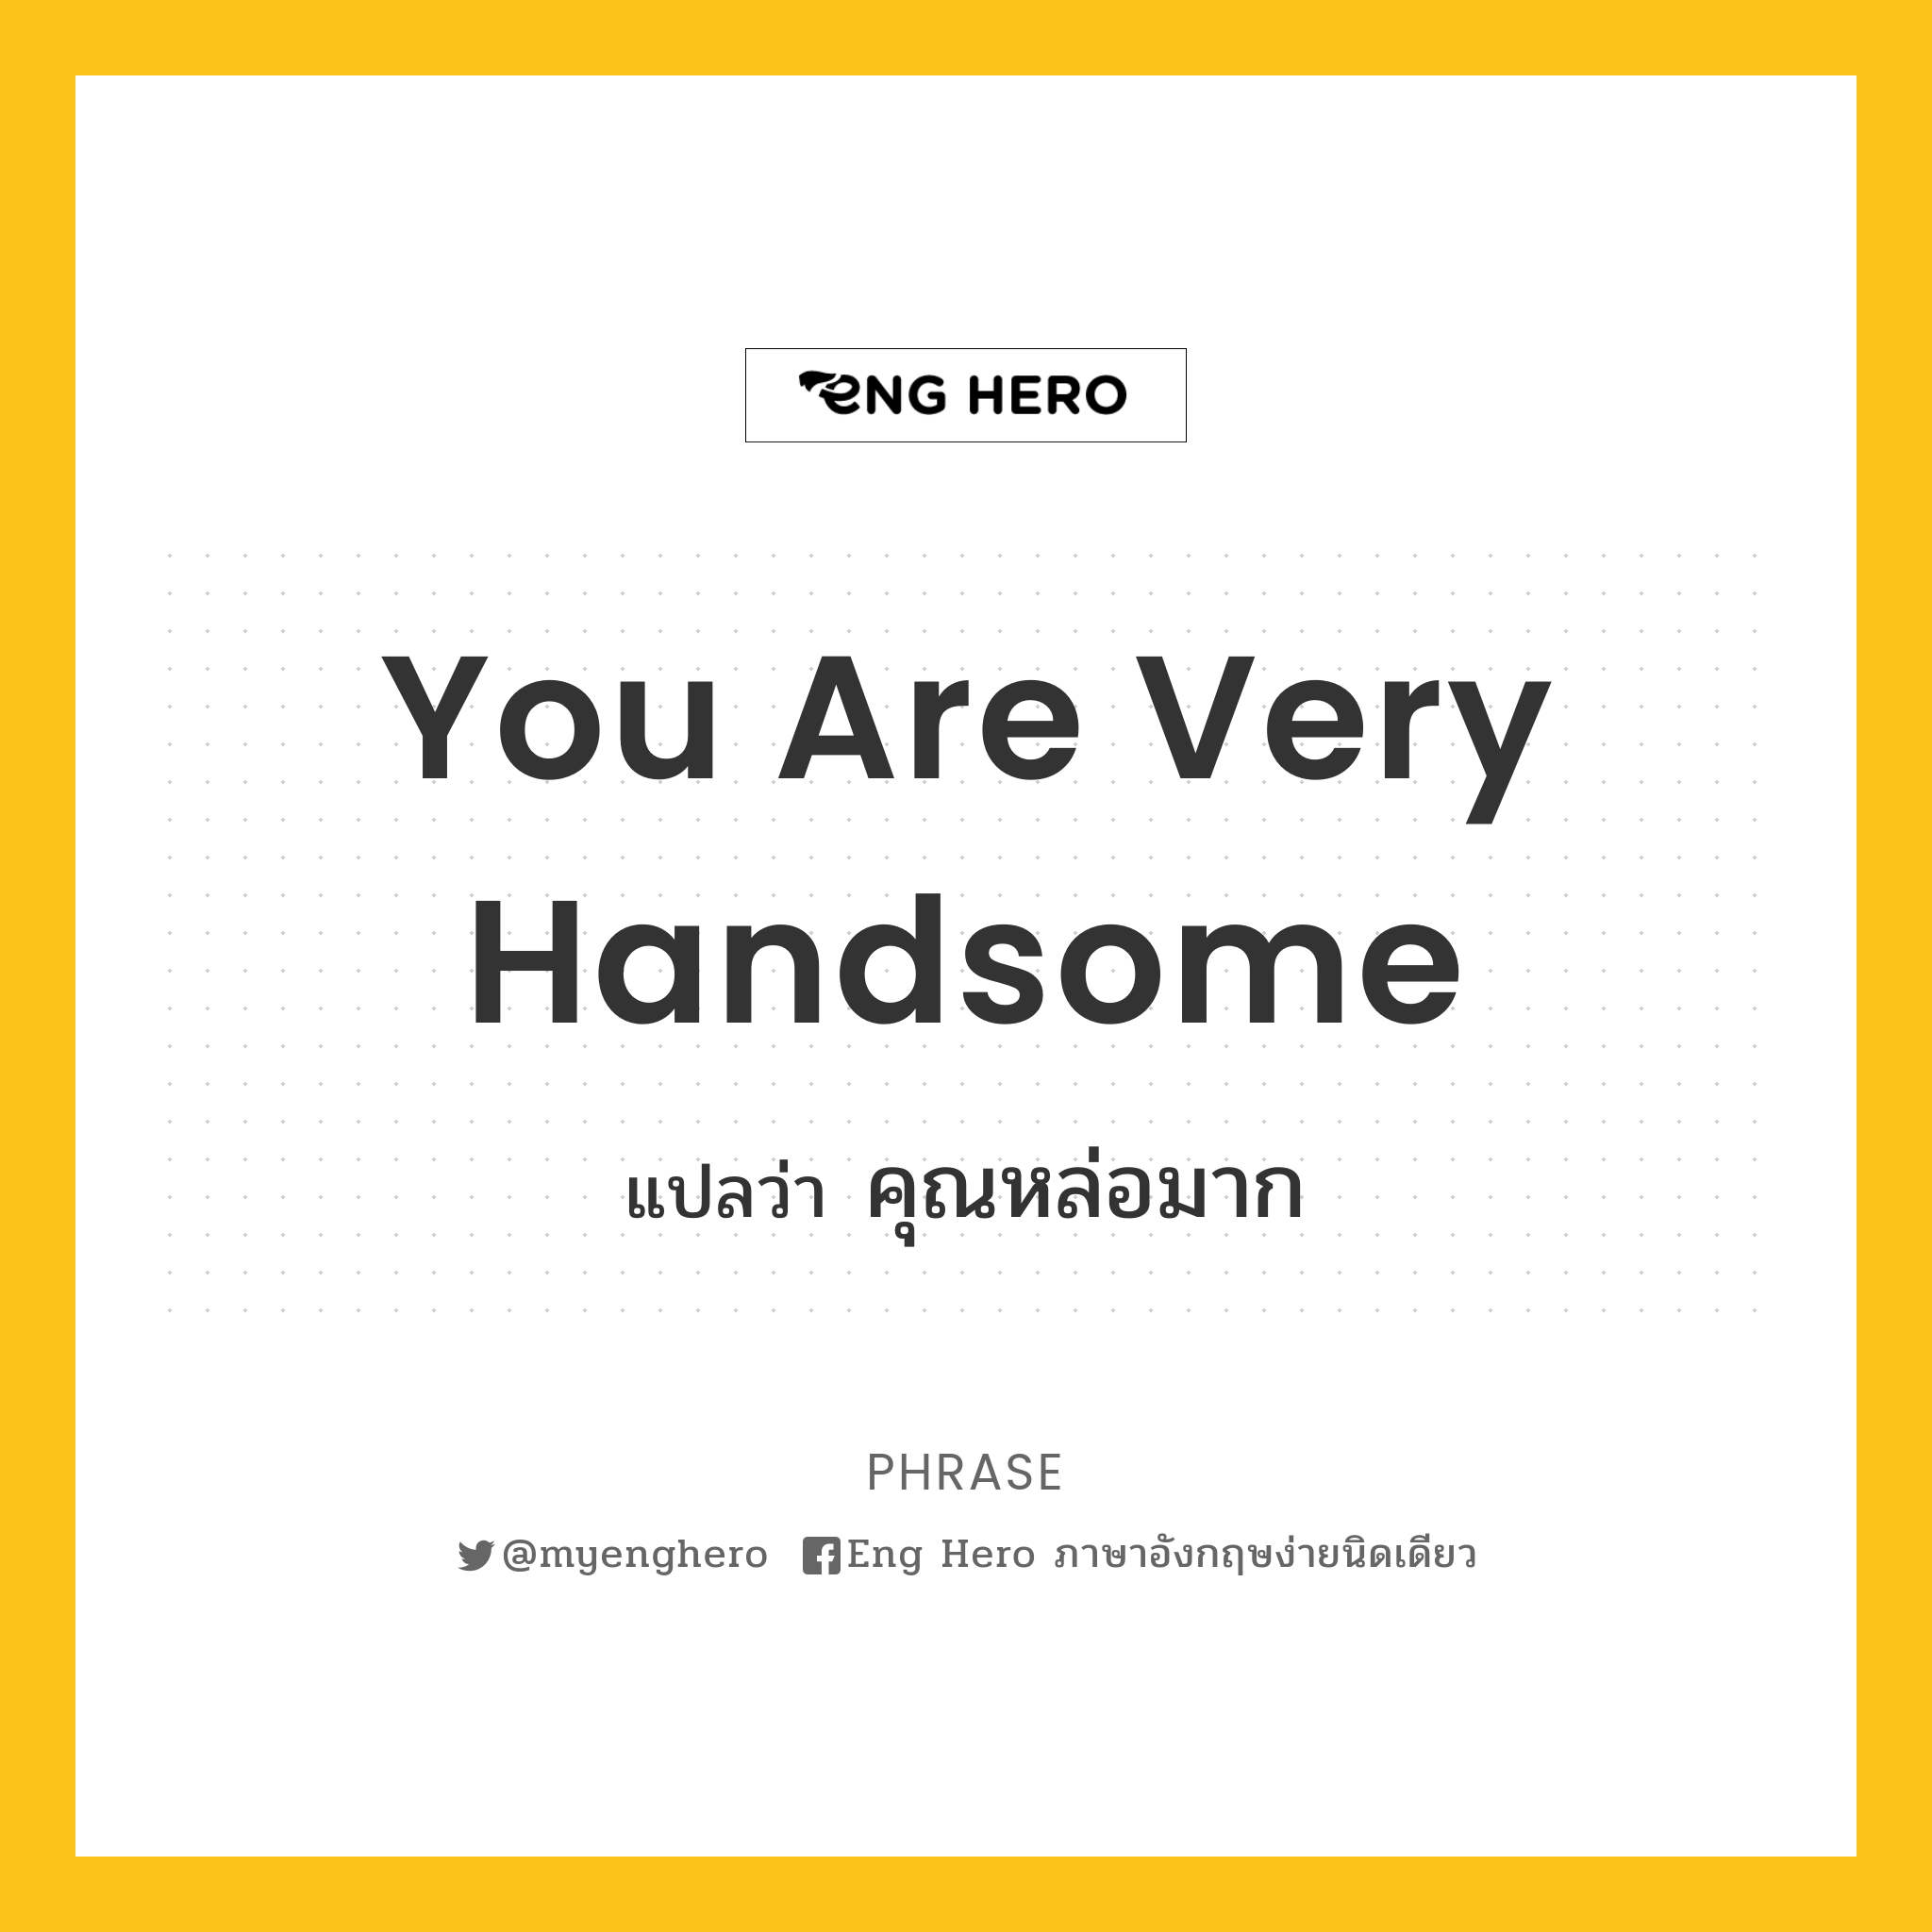 You are very handsome